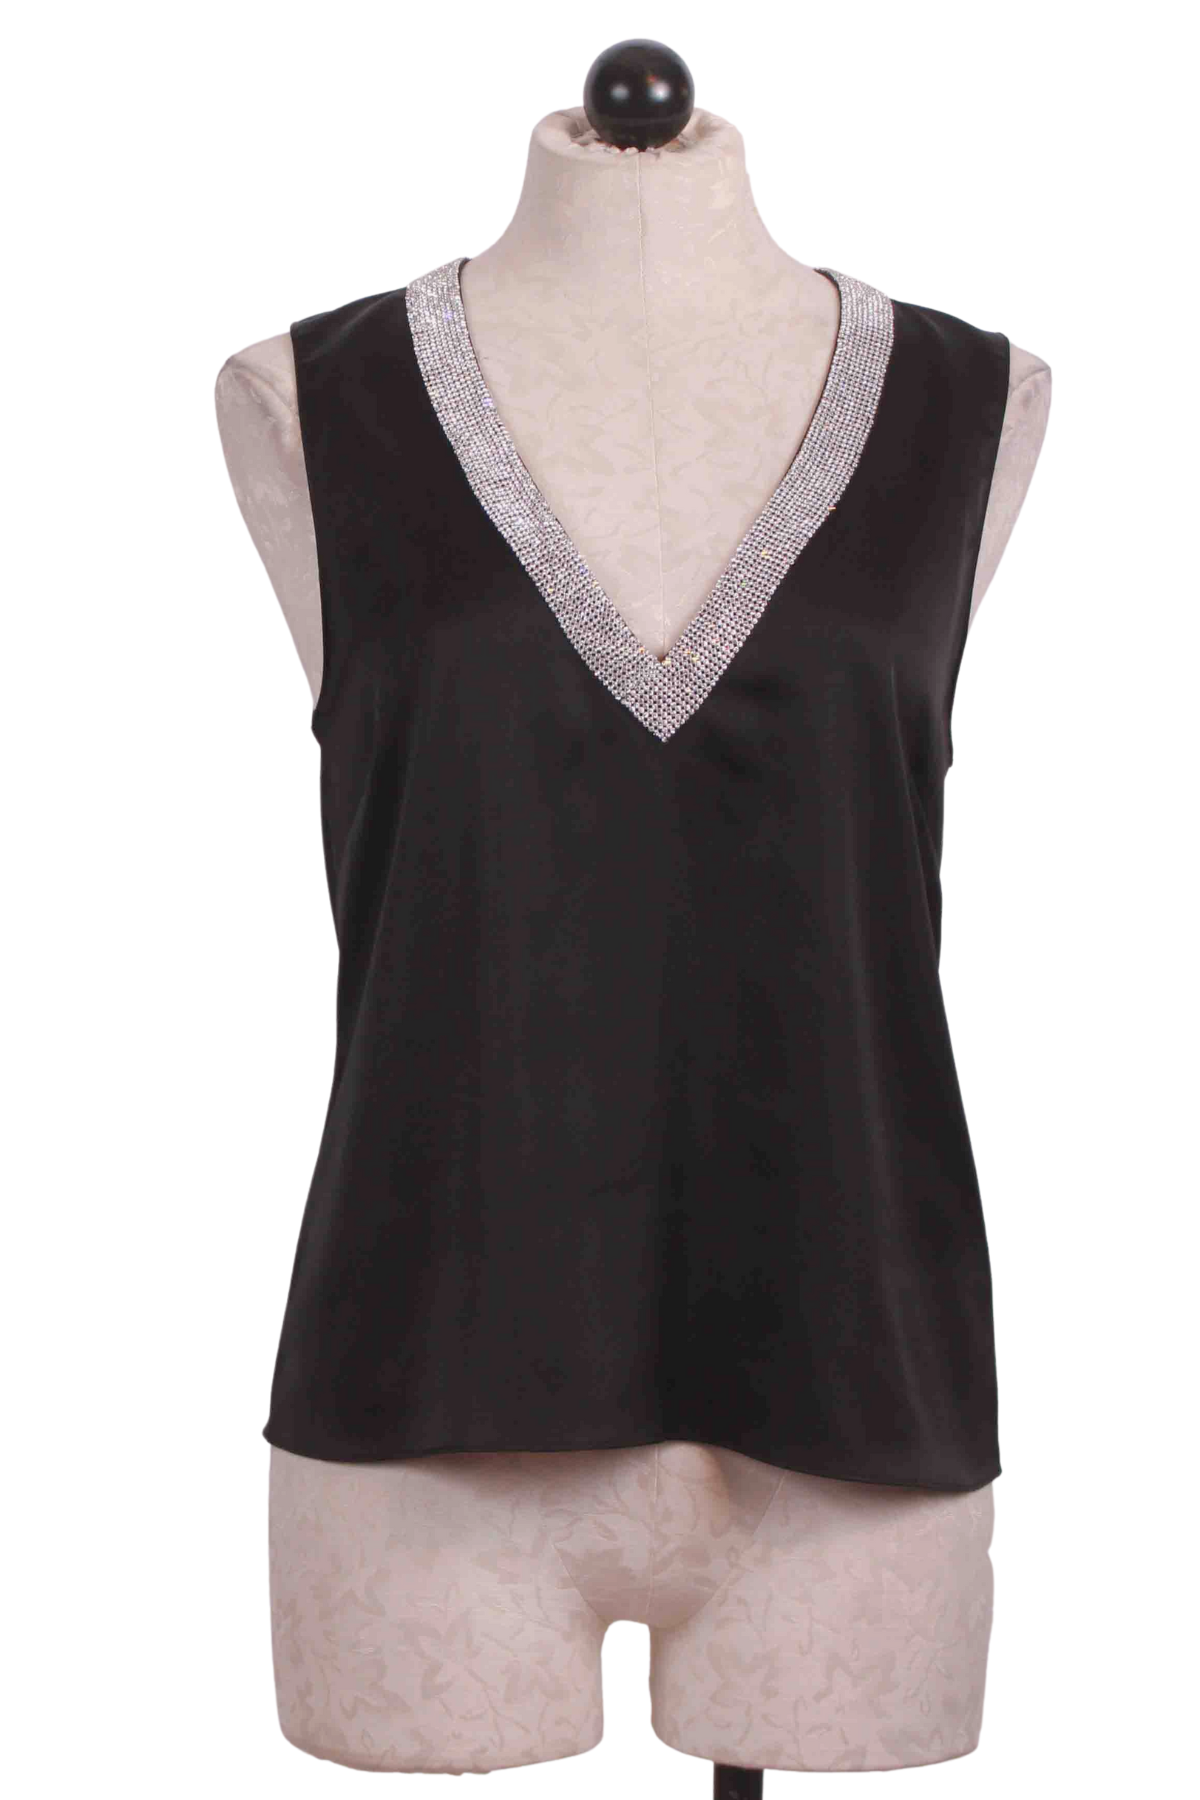 Black Sleeveless Crystal V Neck Candice Top by Generation Love